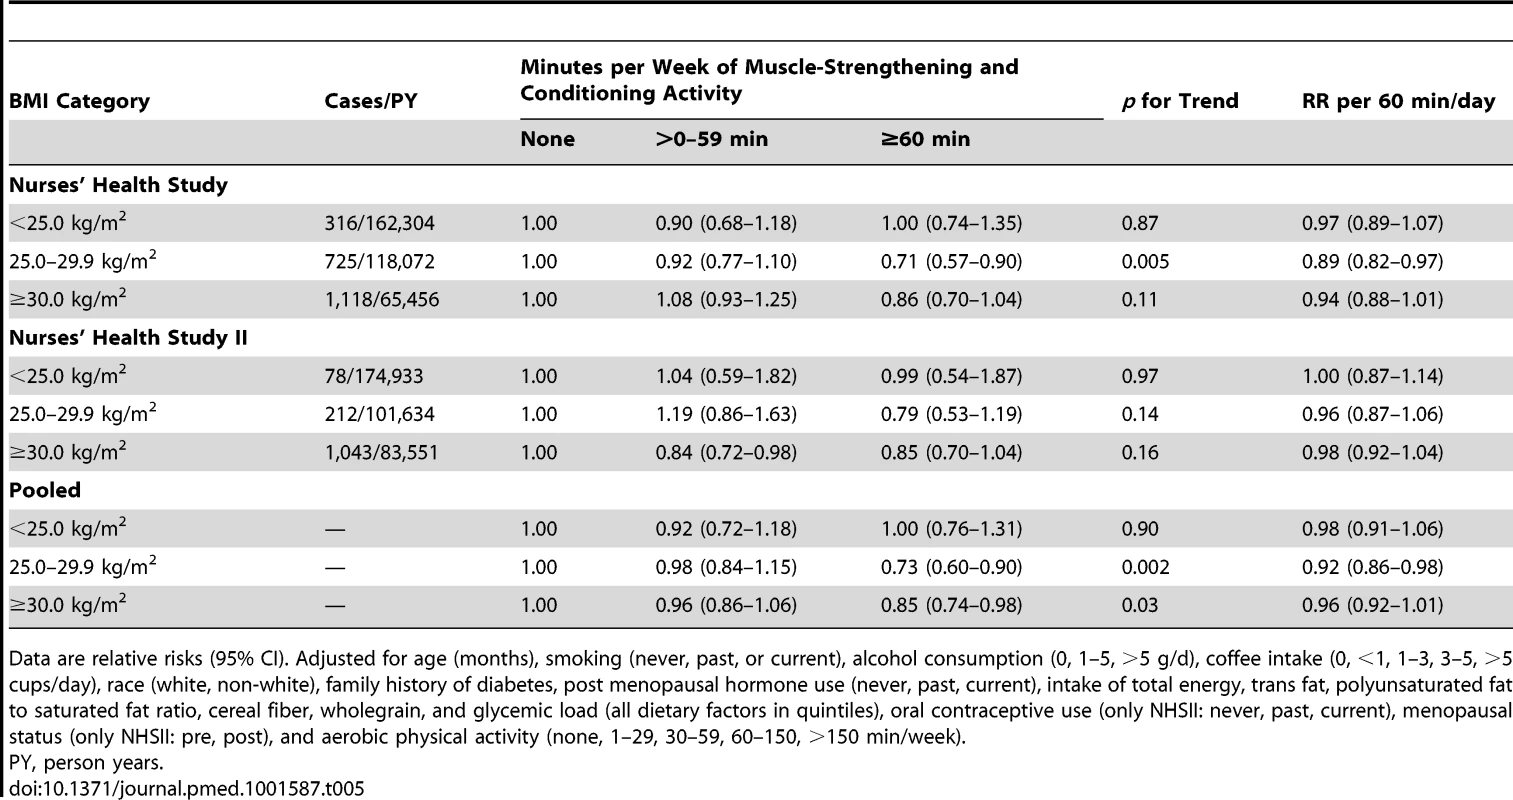 Total muscle-strengthening and conditioning activities and risk of type 2 diabetes stratified by body mass index (&lt;25, 25–&lt;30, ≥30 kg/m<sup>2</sup>).